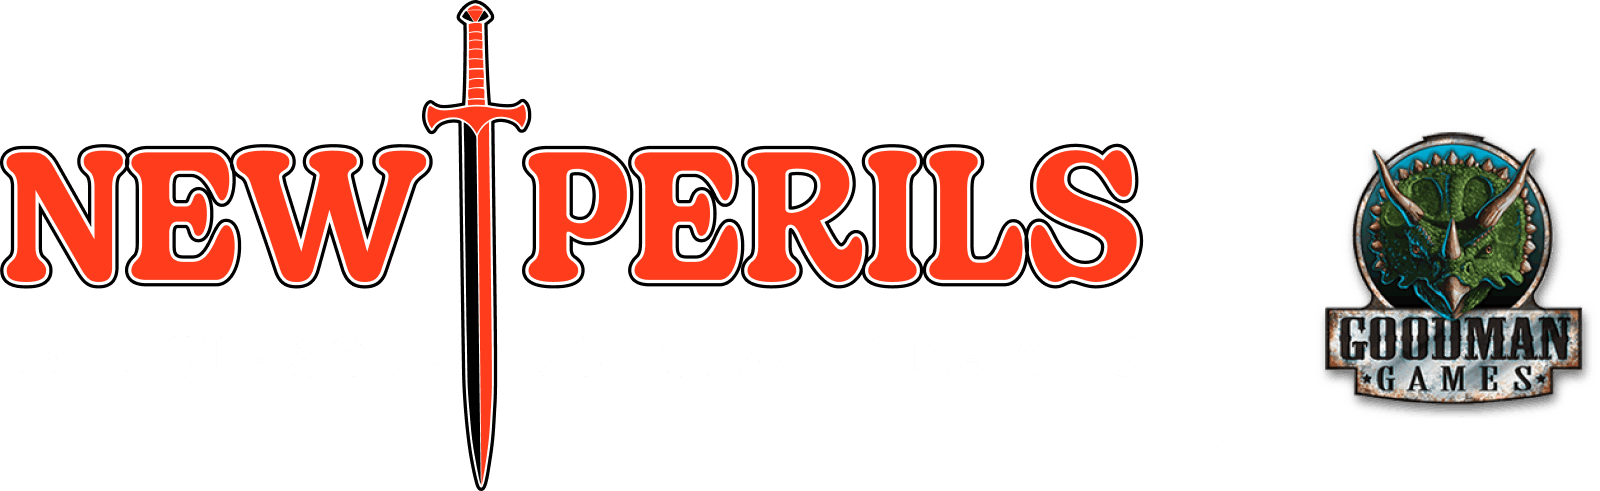 Humble RPG Bundle: New Perils for Classic Dungeon Crawls by Goodman Games